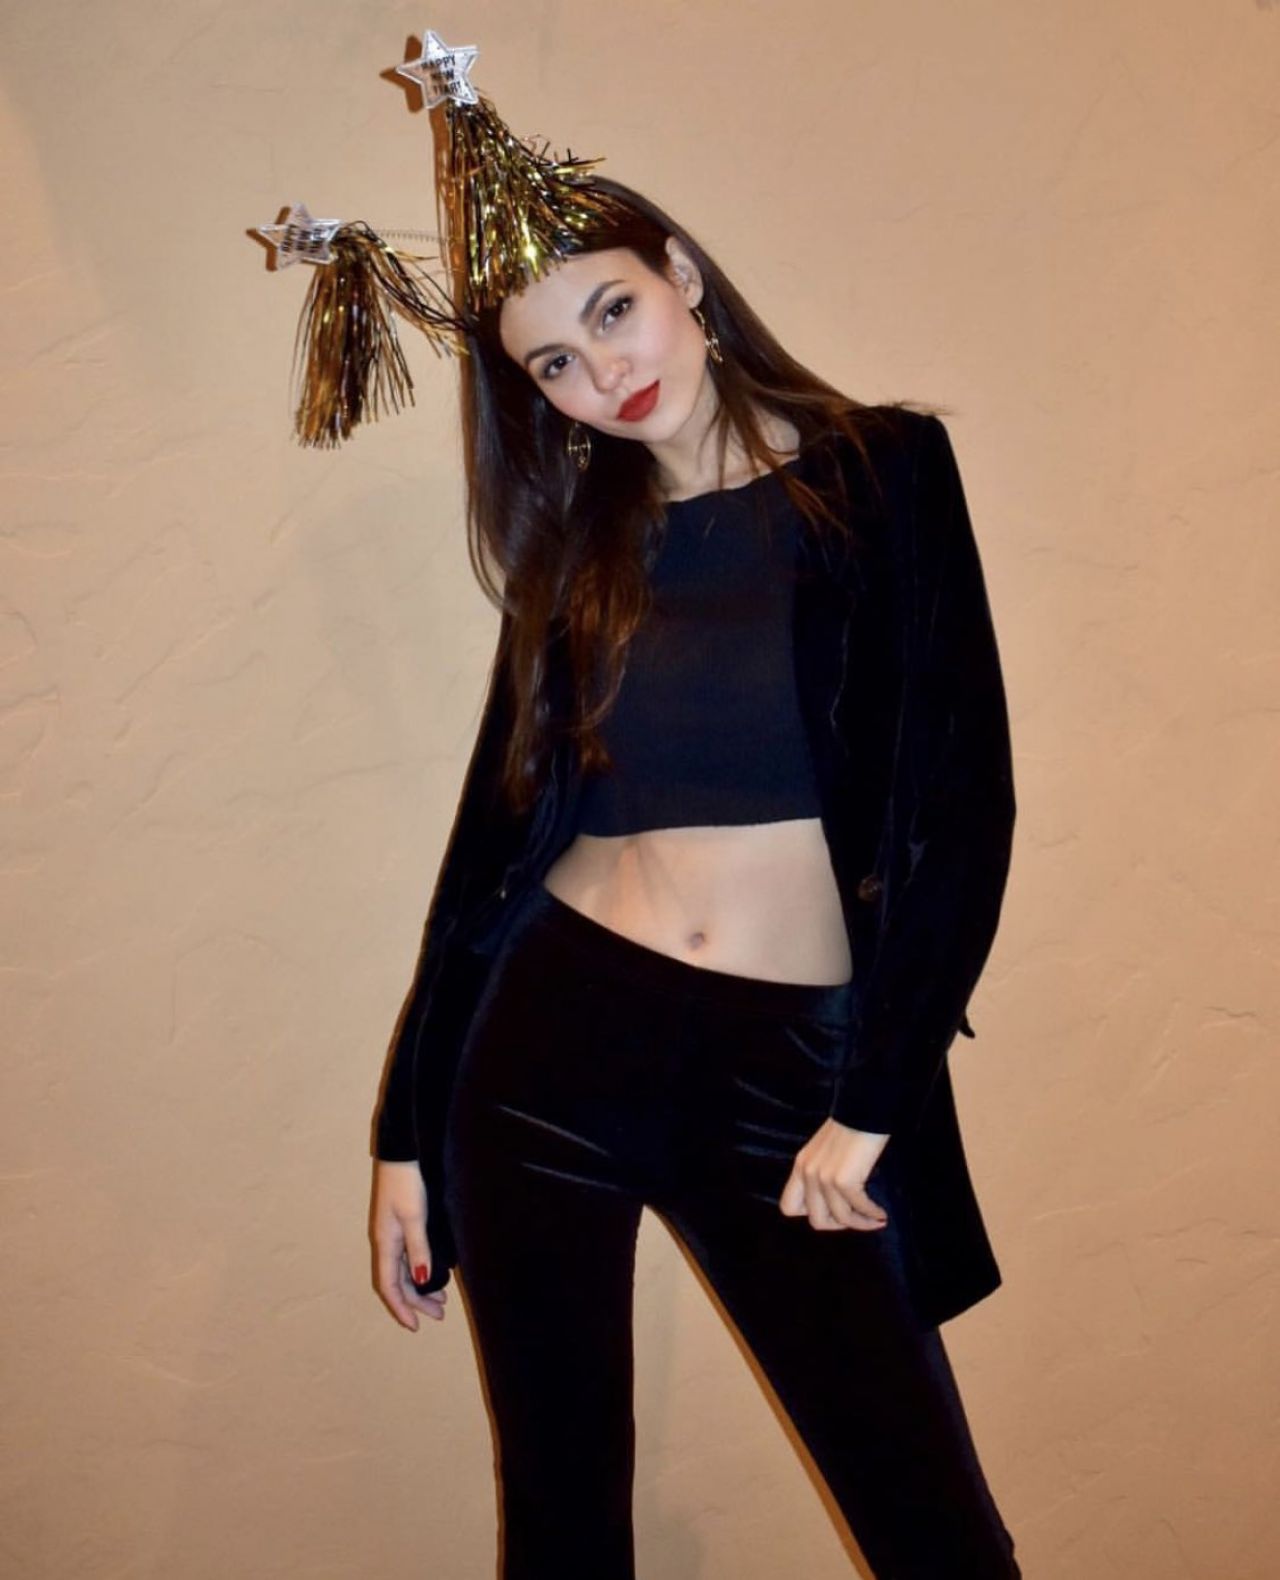 victoria-justice-personal-pics-and-videos-01-02-2019-2.jpg